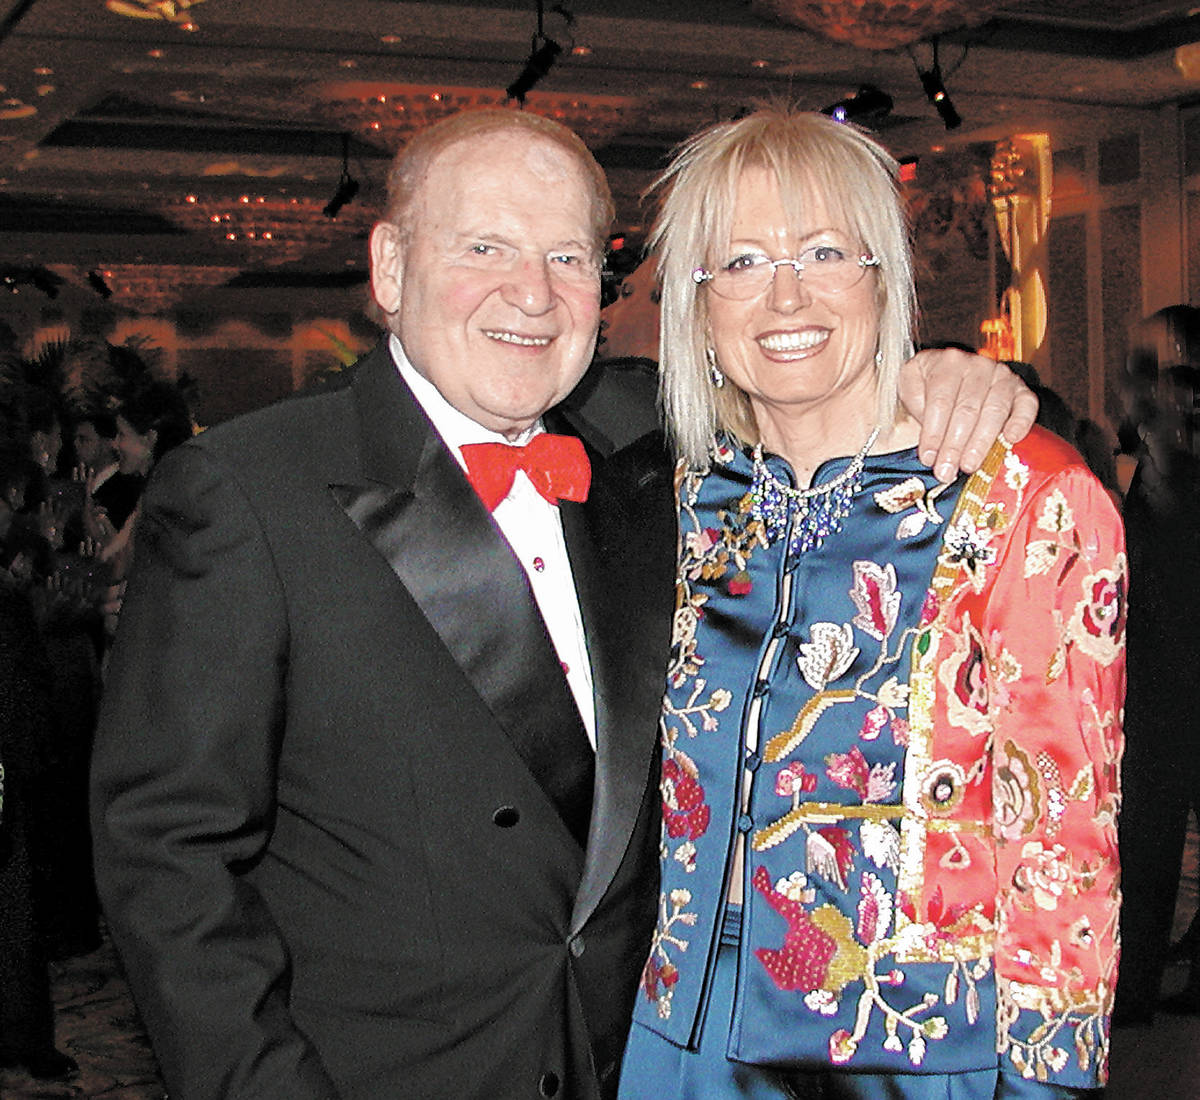 Sheldon Adelson and his wife Dr. Miriam Adelson pose for a photo during the Milton I. Schwartz ...